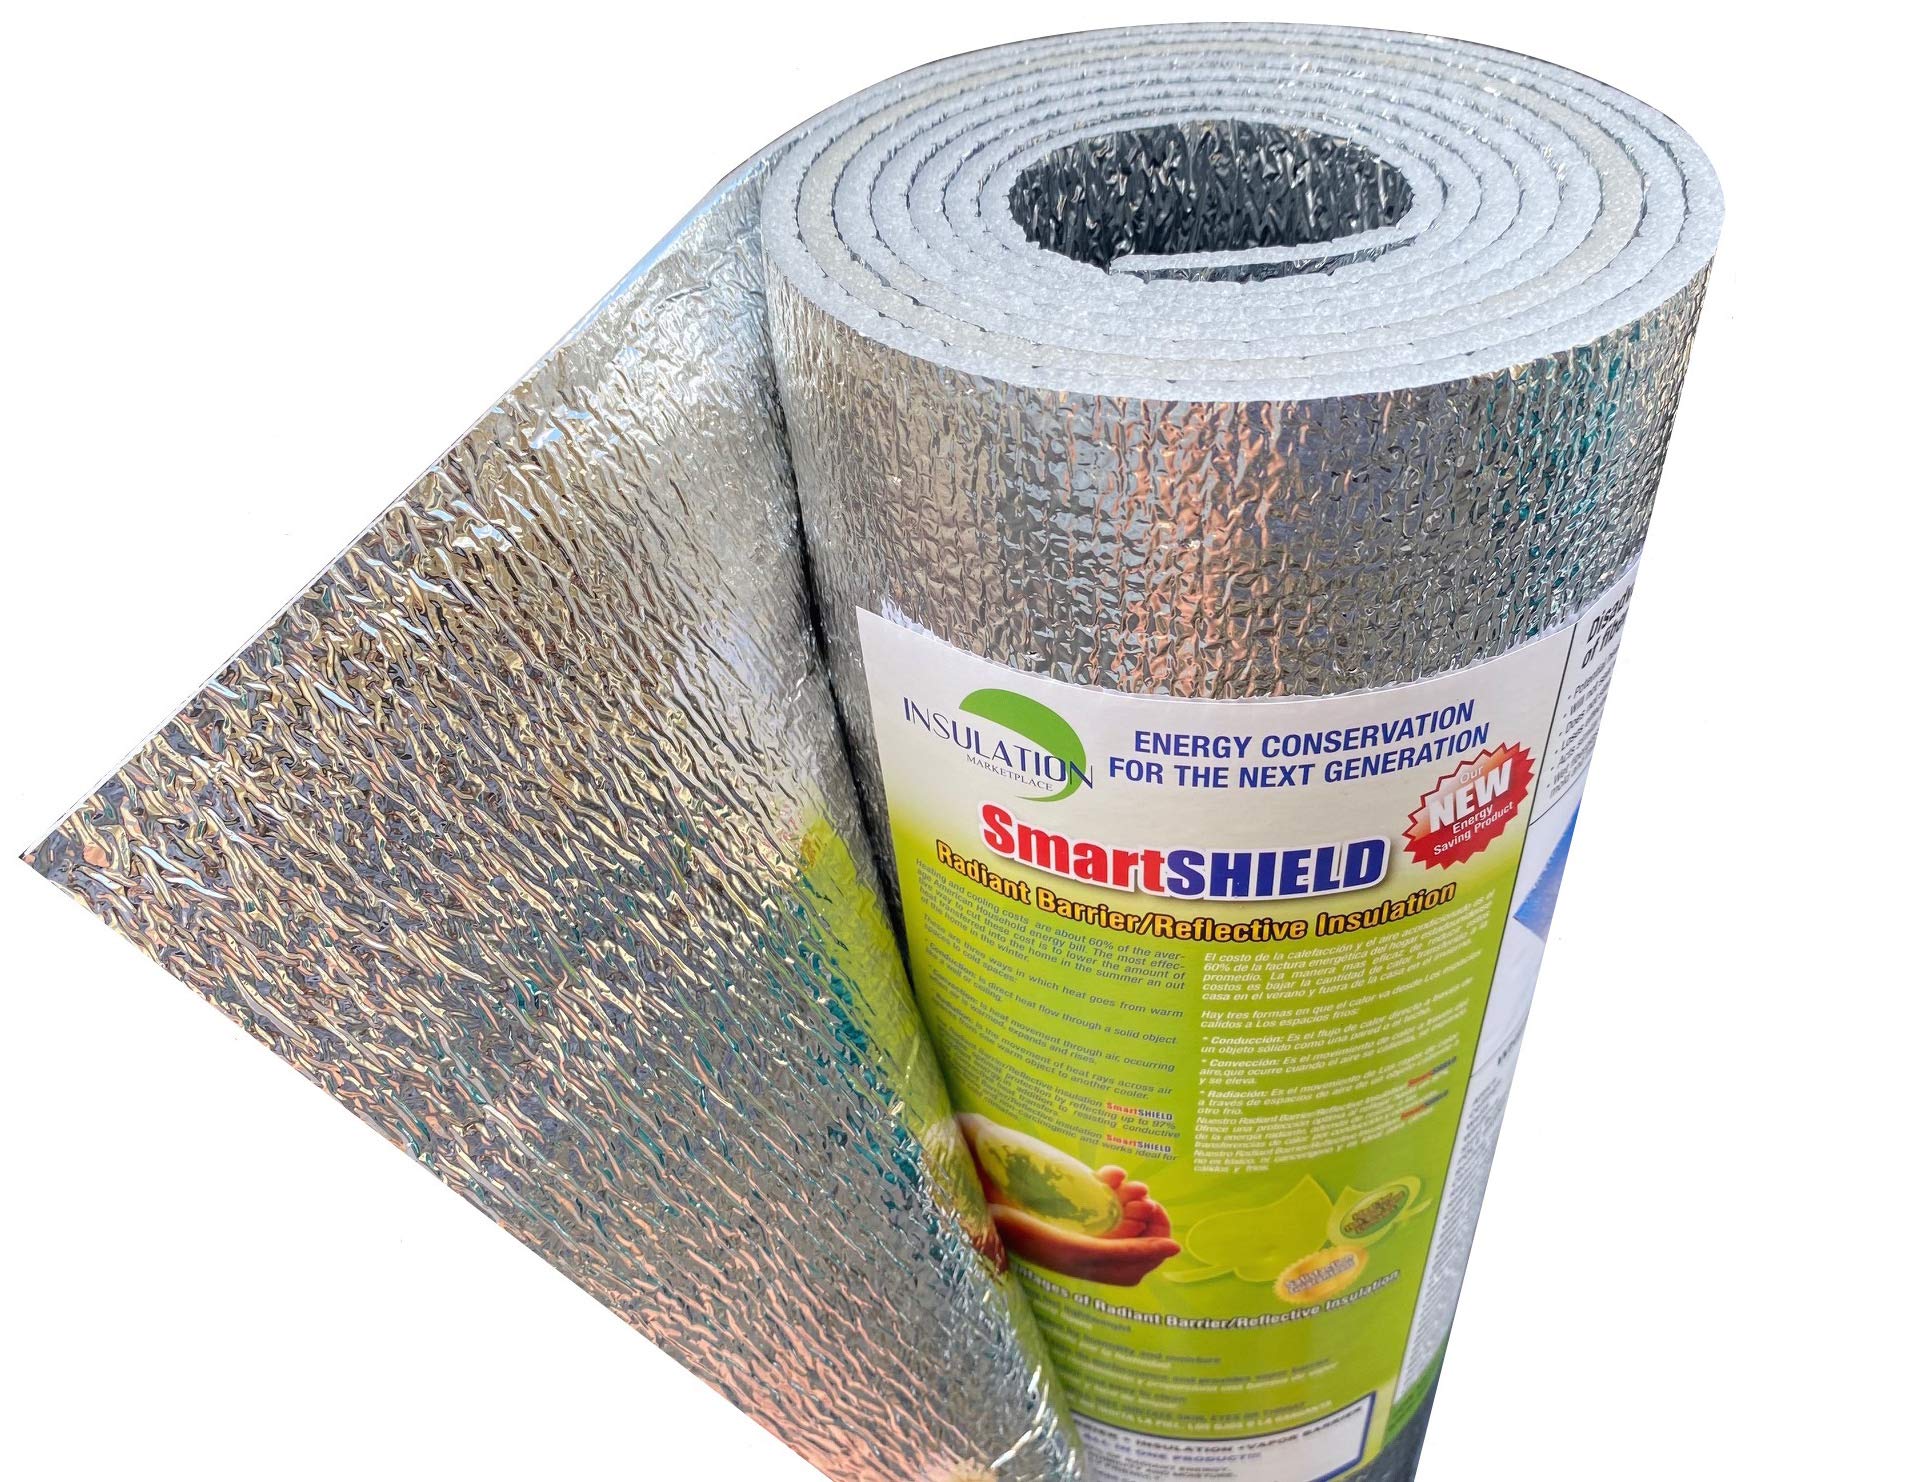 INSULATION MARKETPLACE SmartSHIELD -3mm 24"x10Ft Reflective Insulation Roll, Foam Core Radiant Barrier, Thermal Foil Insulation, Commercial Grade